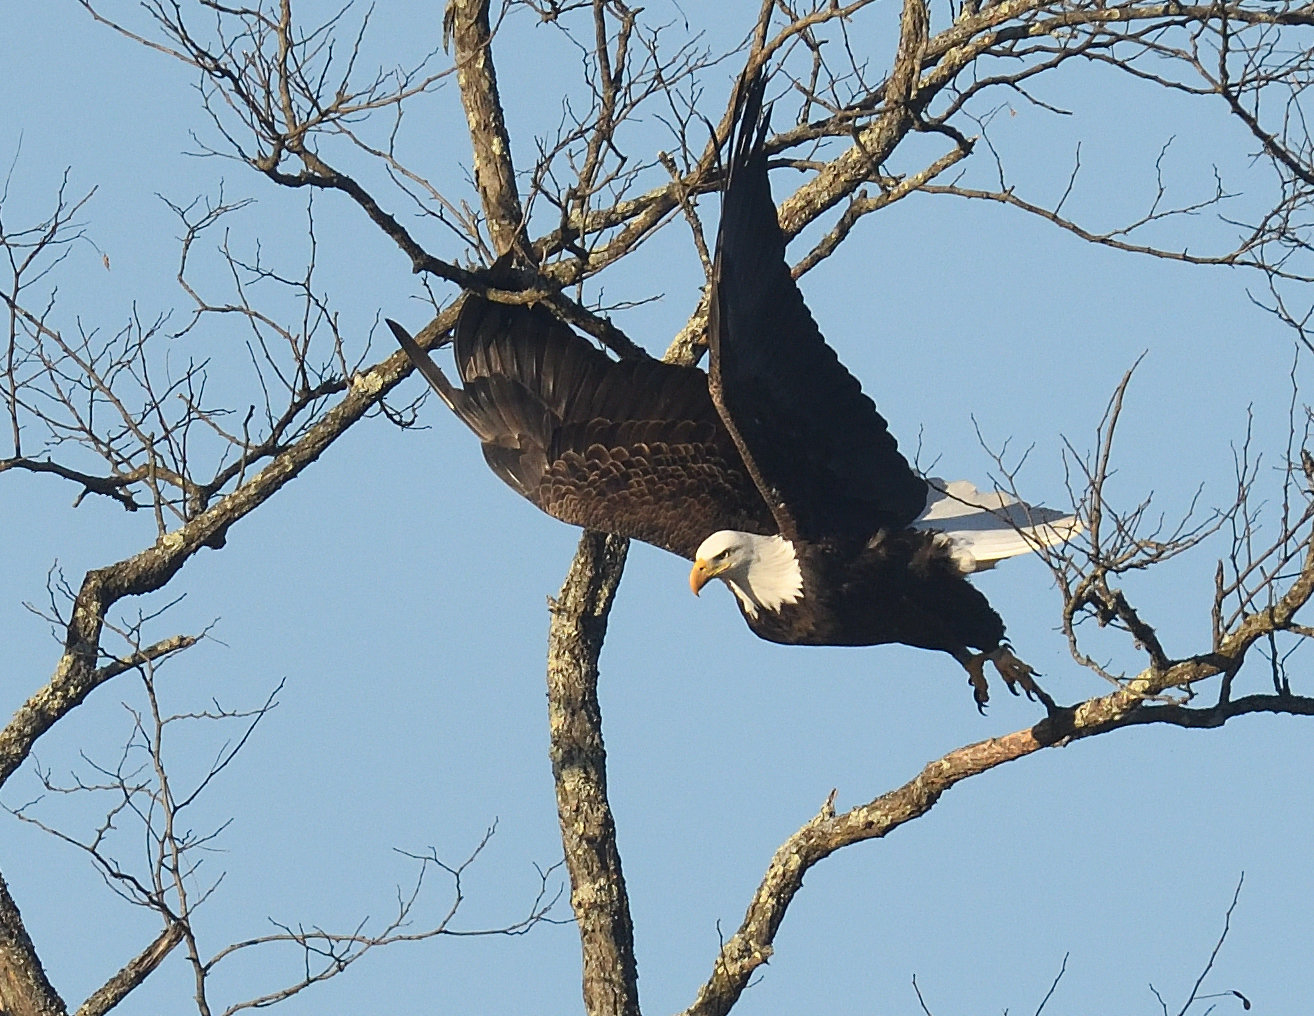 The eagle has now fully vaulted itself off the perch with a powerful push-off with its legs. The wings are at their full upward position and are already a couple hundredths of a second into the first powerful down stroke.